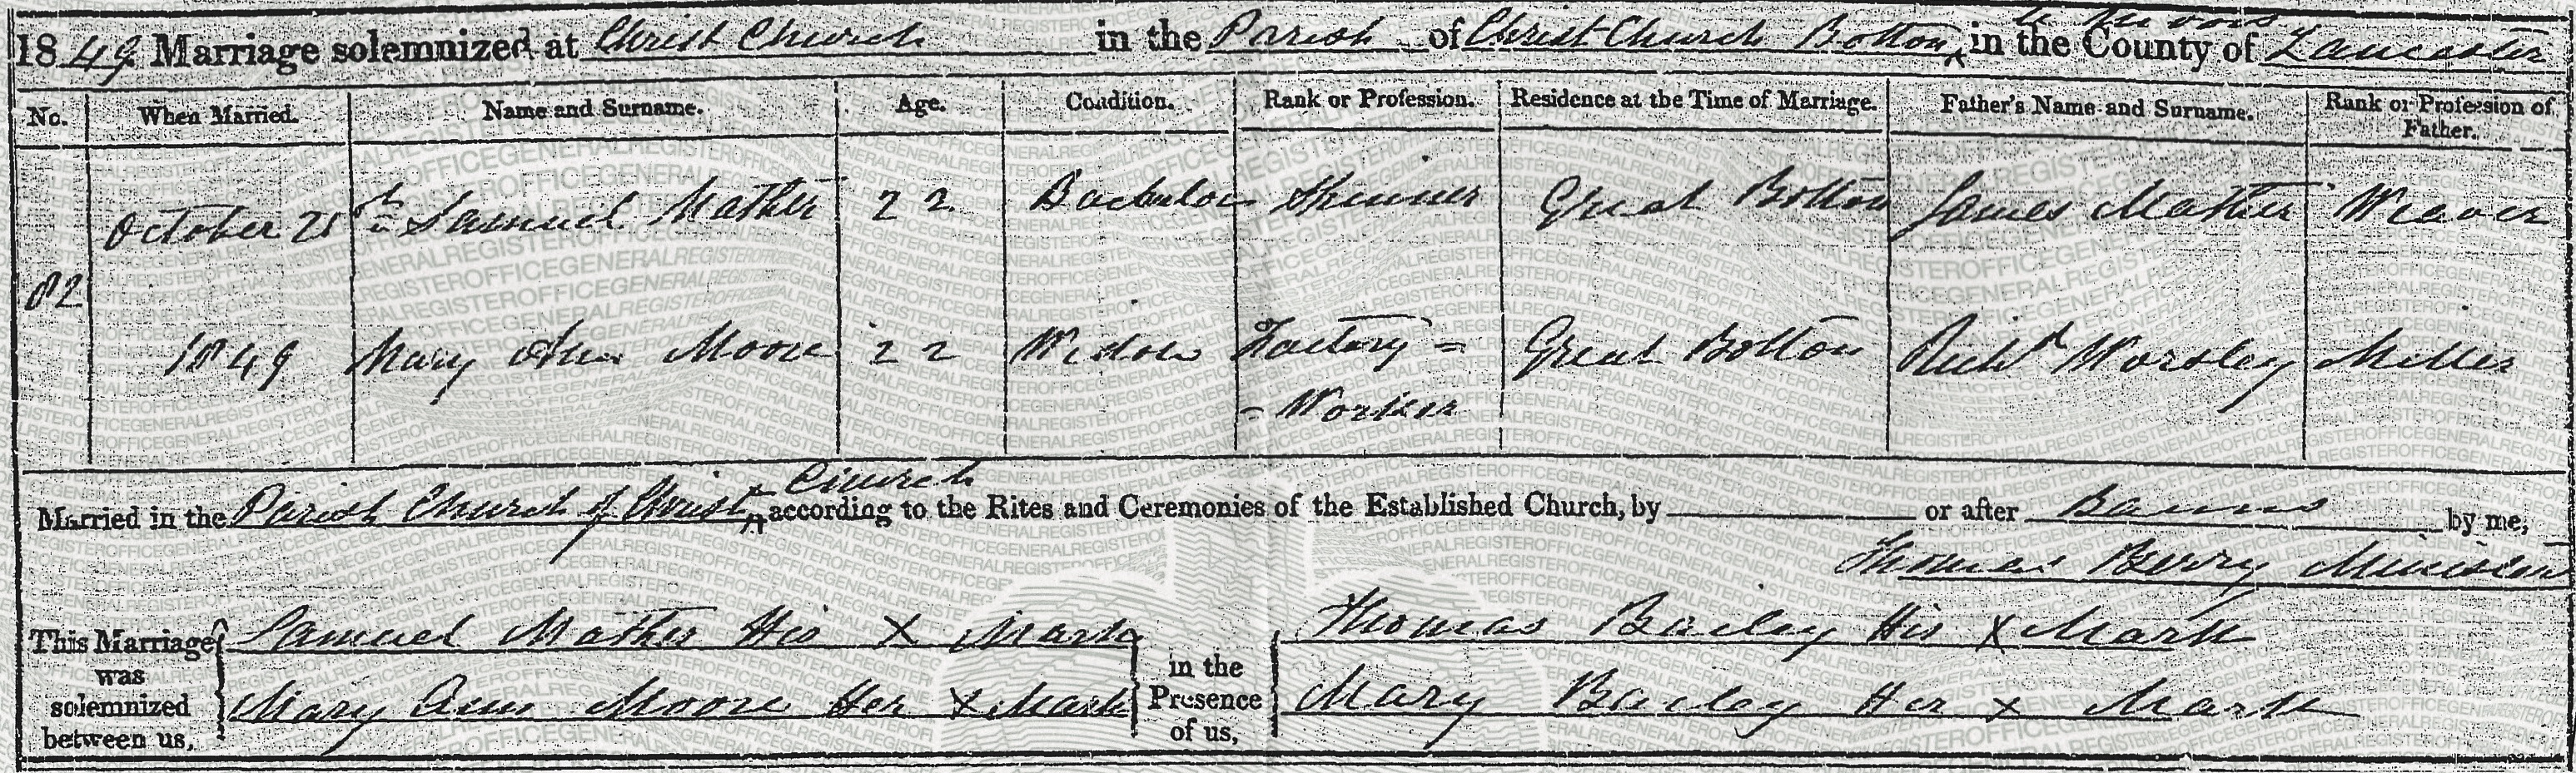 Taken on October 21st, 1849 and sourced from Certificate - Marriage.